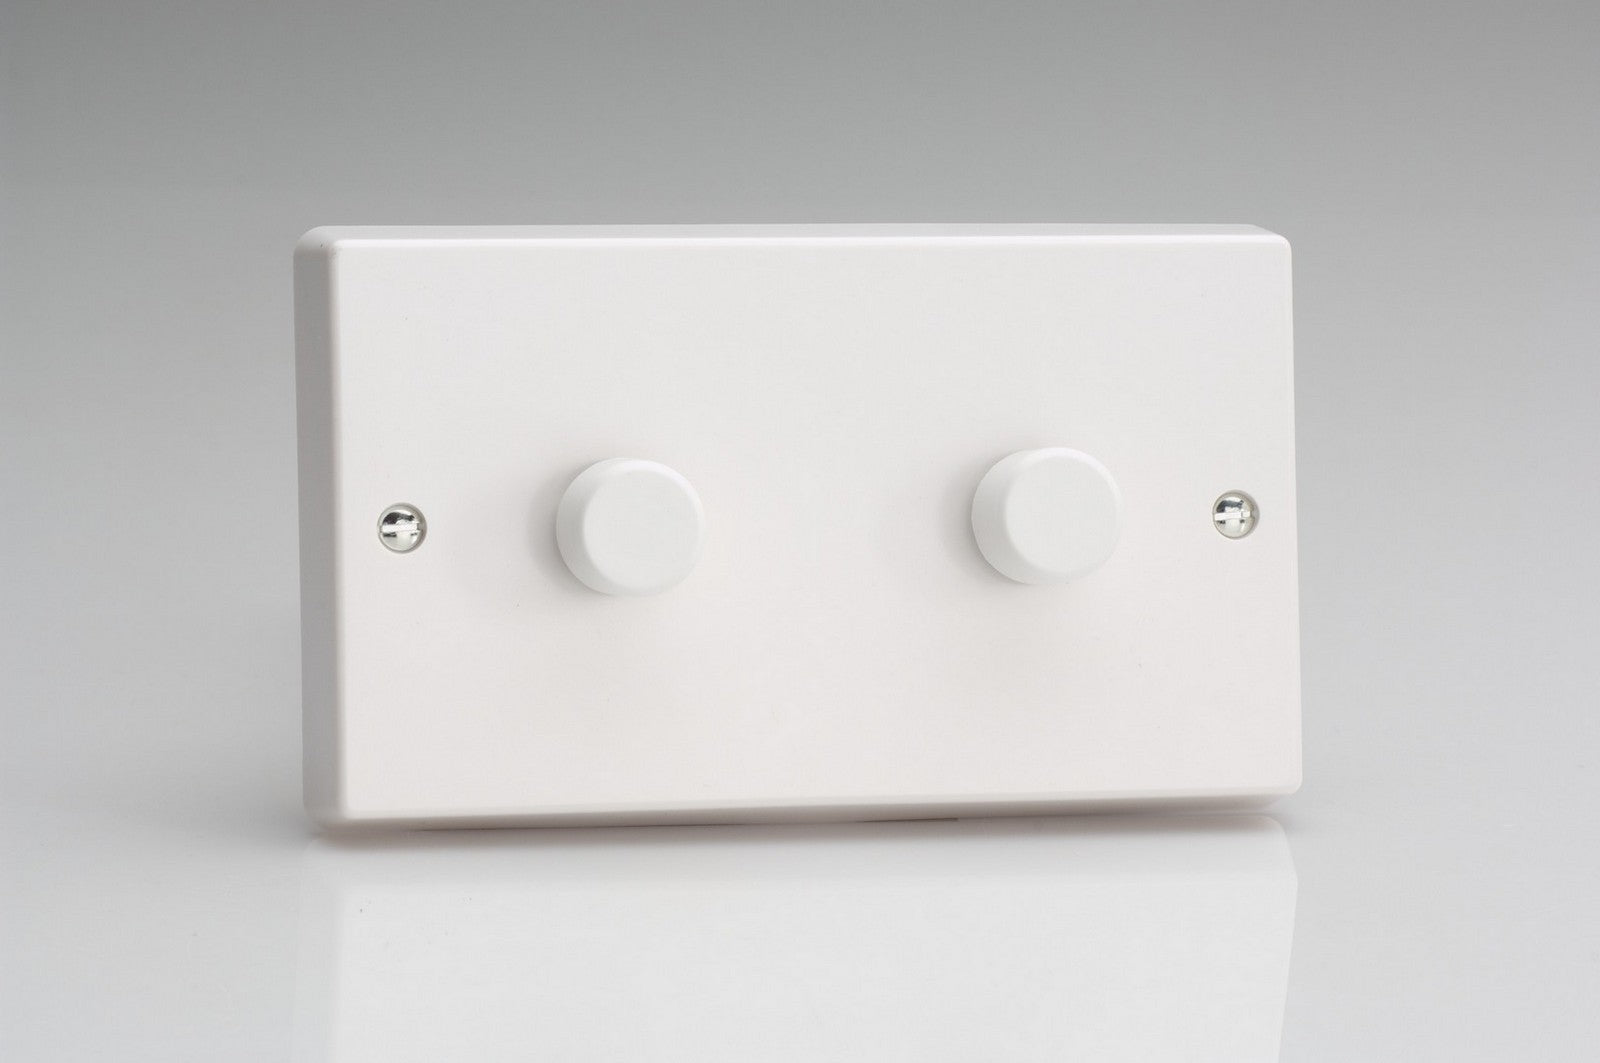 Varilight HQ62W White White Plastic 2-Gang 2-Way Push-On/Off Rotary Dimmer 2 x 200-600W (Twin Plate)